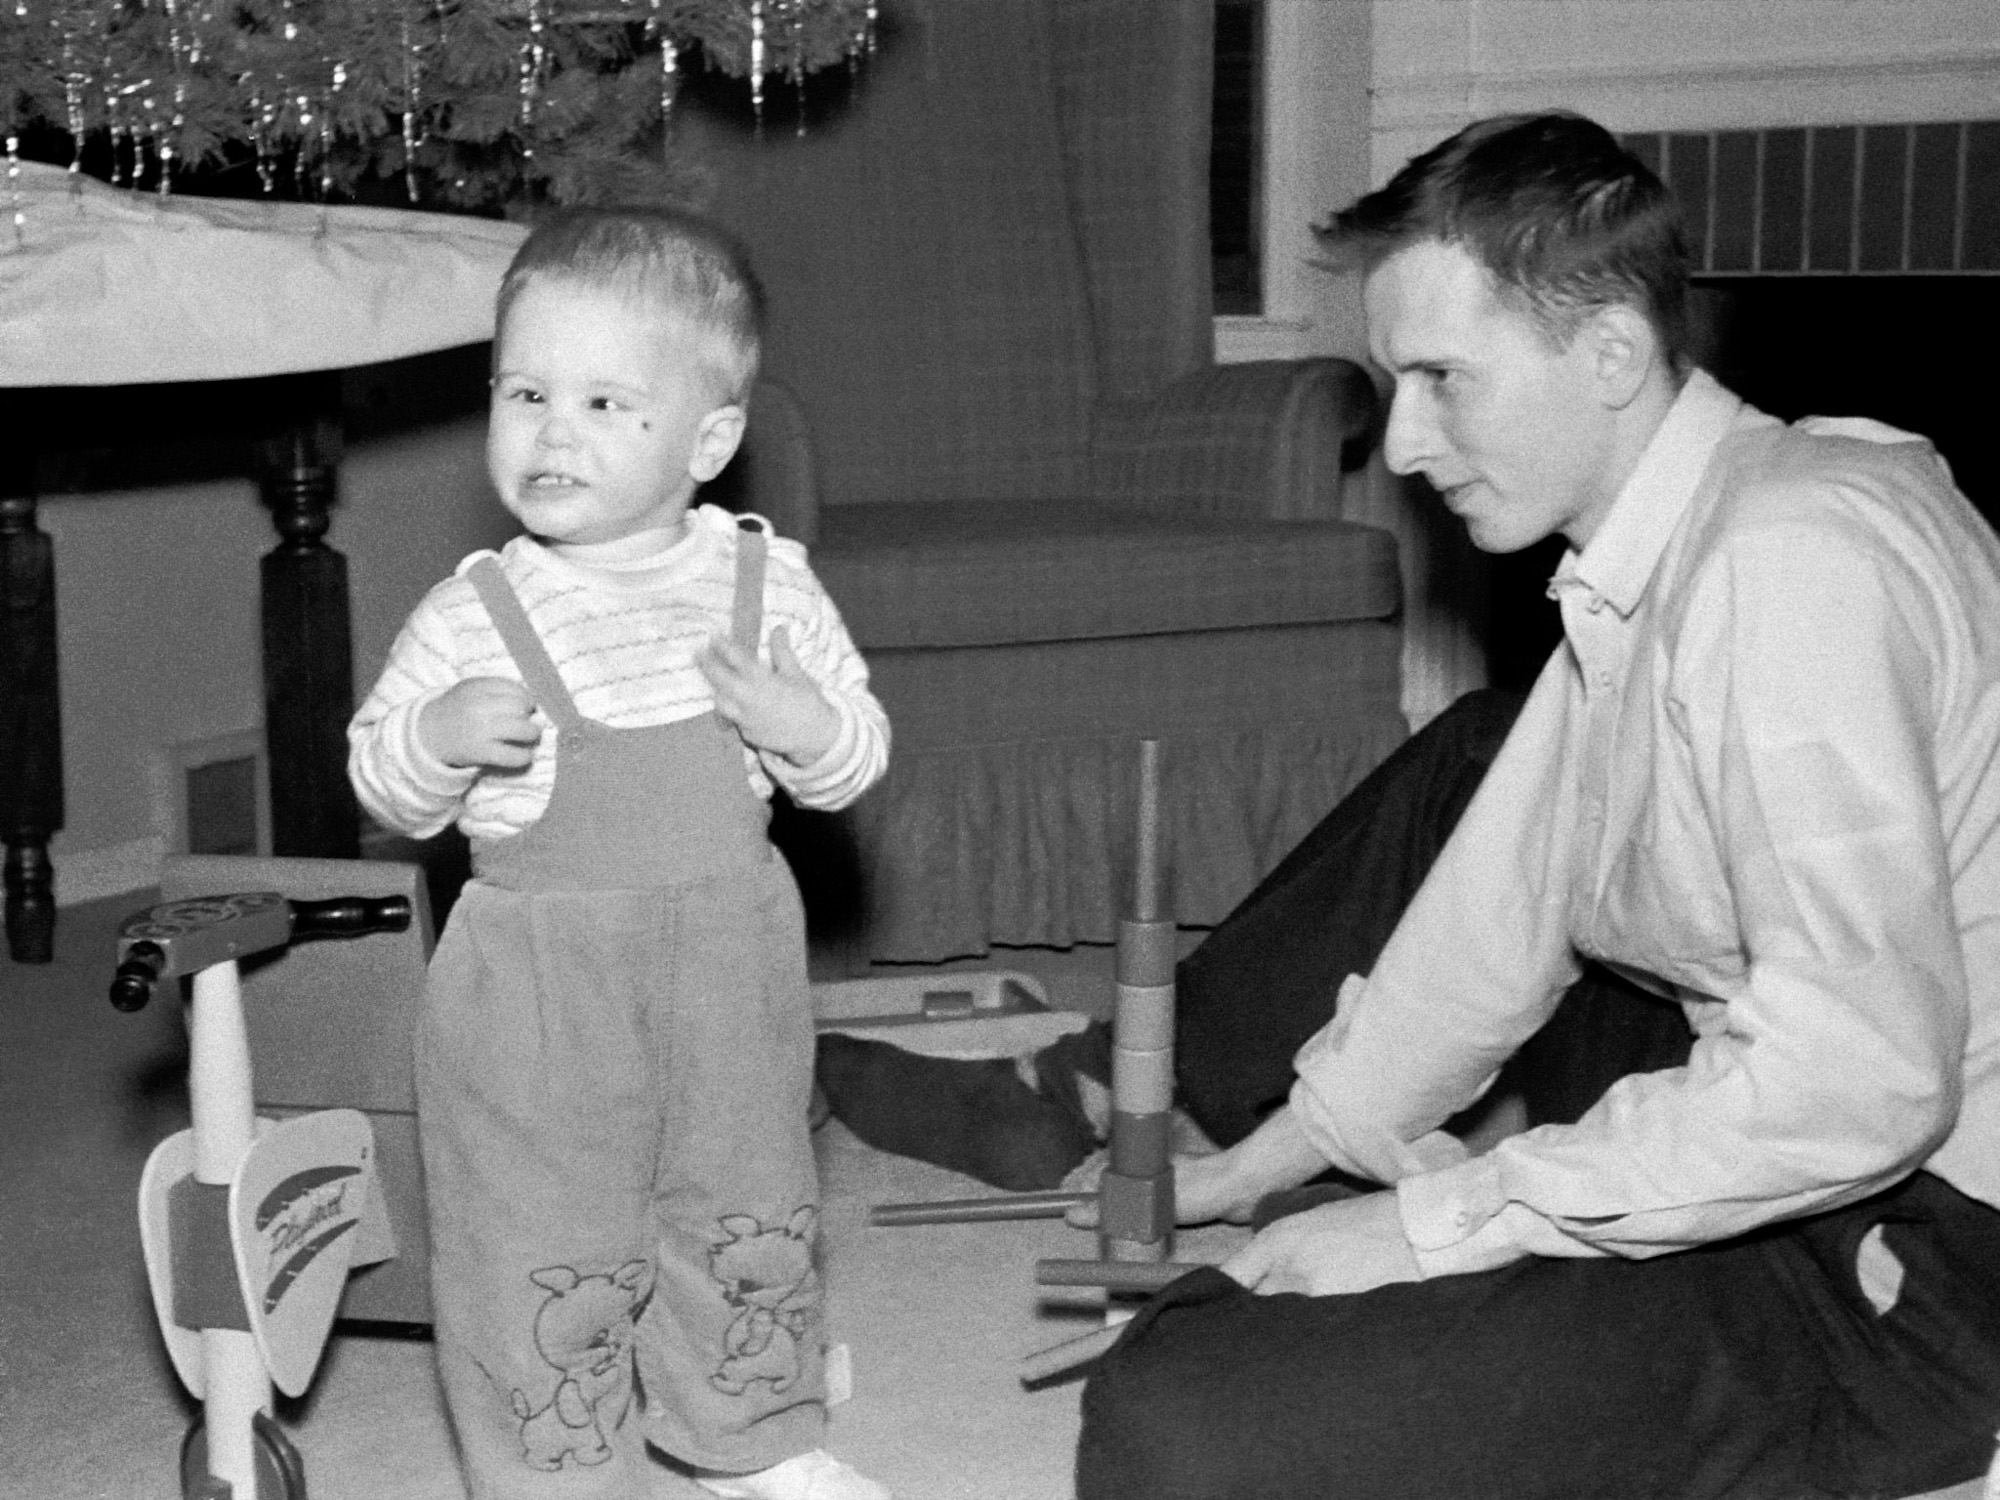 This is me celebrating my second Christmas.  While Mom handles the camera (a rarity) Dad (29-years-old) and I are in the front room of our first house on the North East side of Indianapolis.

The bump by my left eye has nothing to do with the left eye's inward turn. My congenital esotropia was corrected via surgery about a year later.

The Playschool trike lasted many years through multiple siblings but is with us no more.  The flat wagon behind Dad's right foot holds the various blocks and rods that we are playing with. My Mom still has the blocks and wheeled wagon - now used by a second generation. View full size.